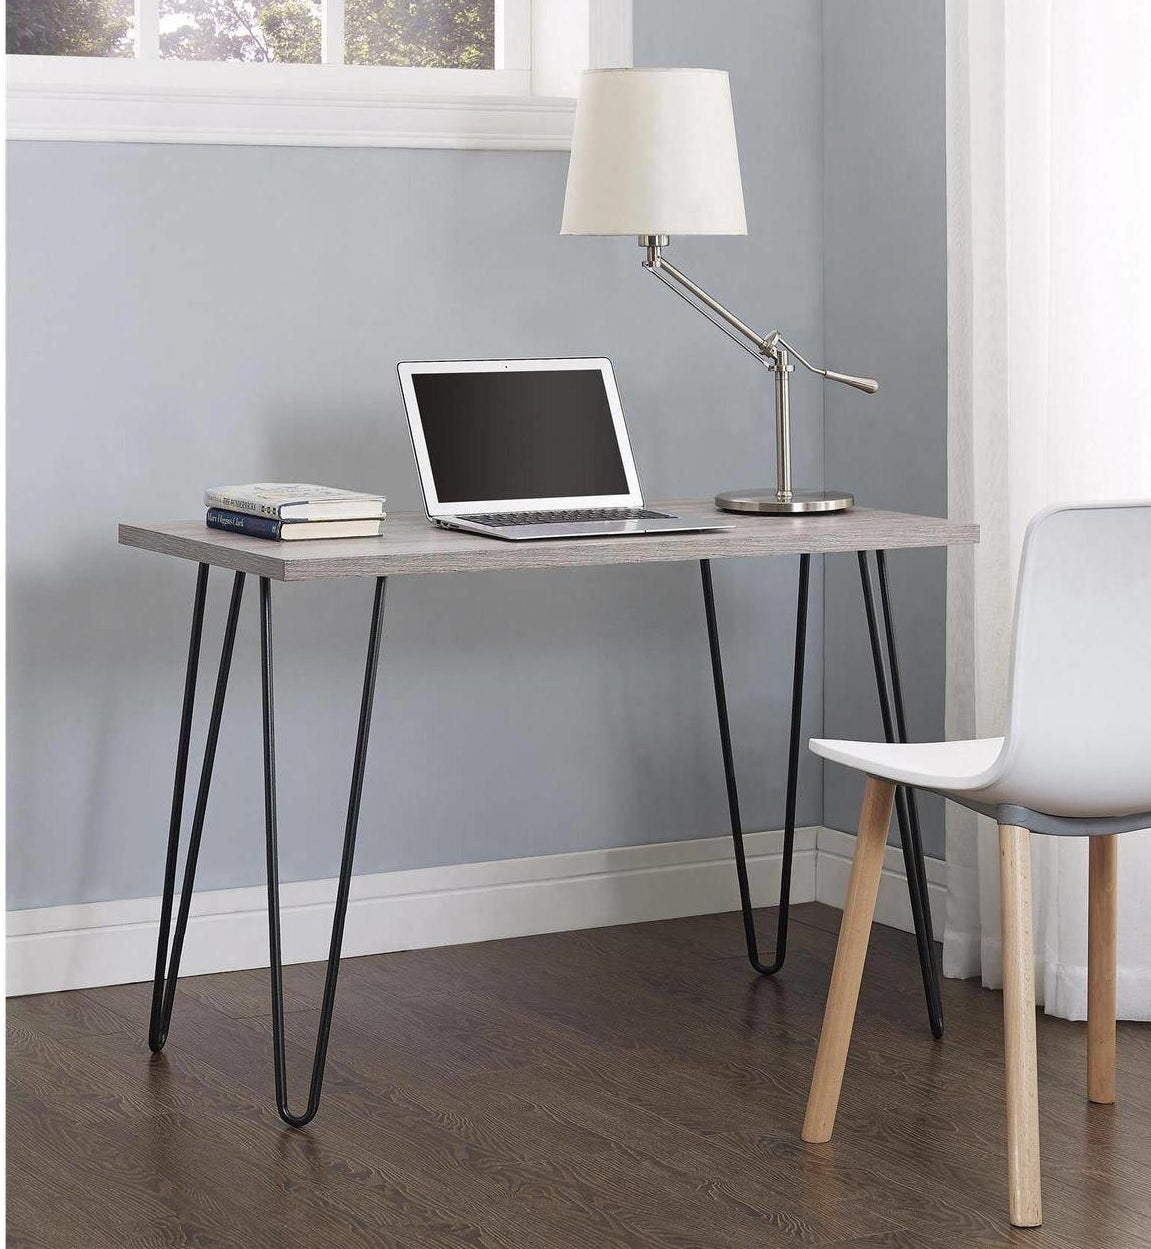 desk with weathered wood finish and metal hairpin legs